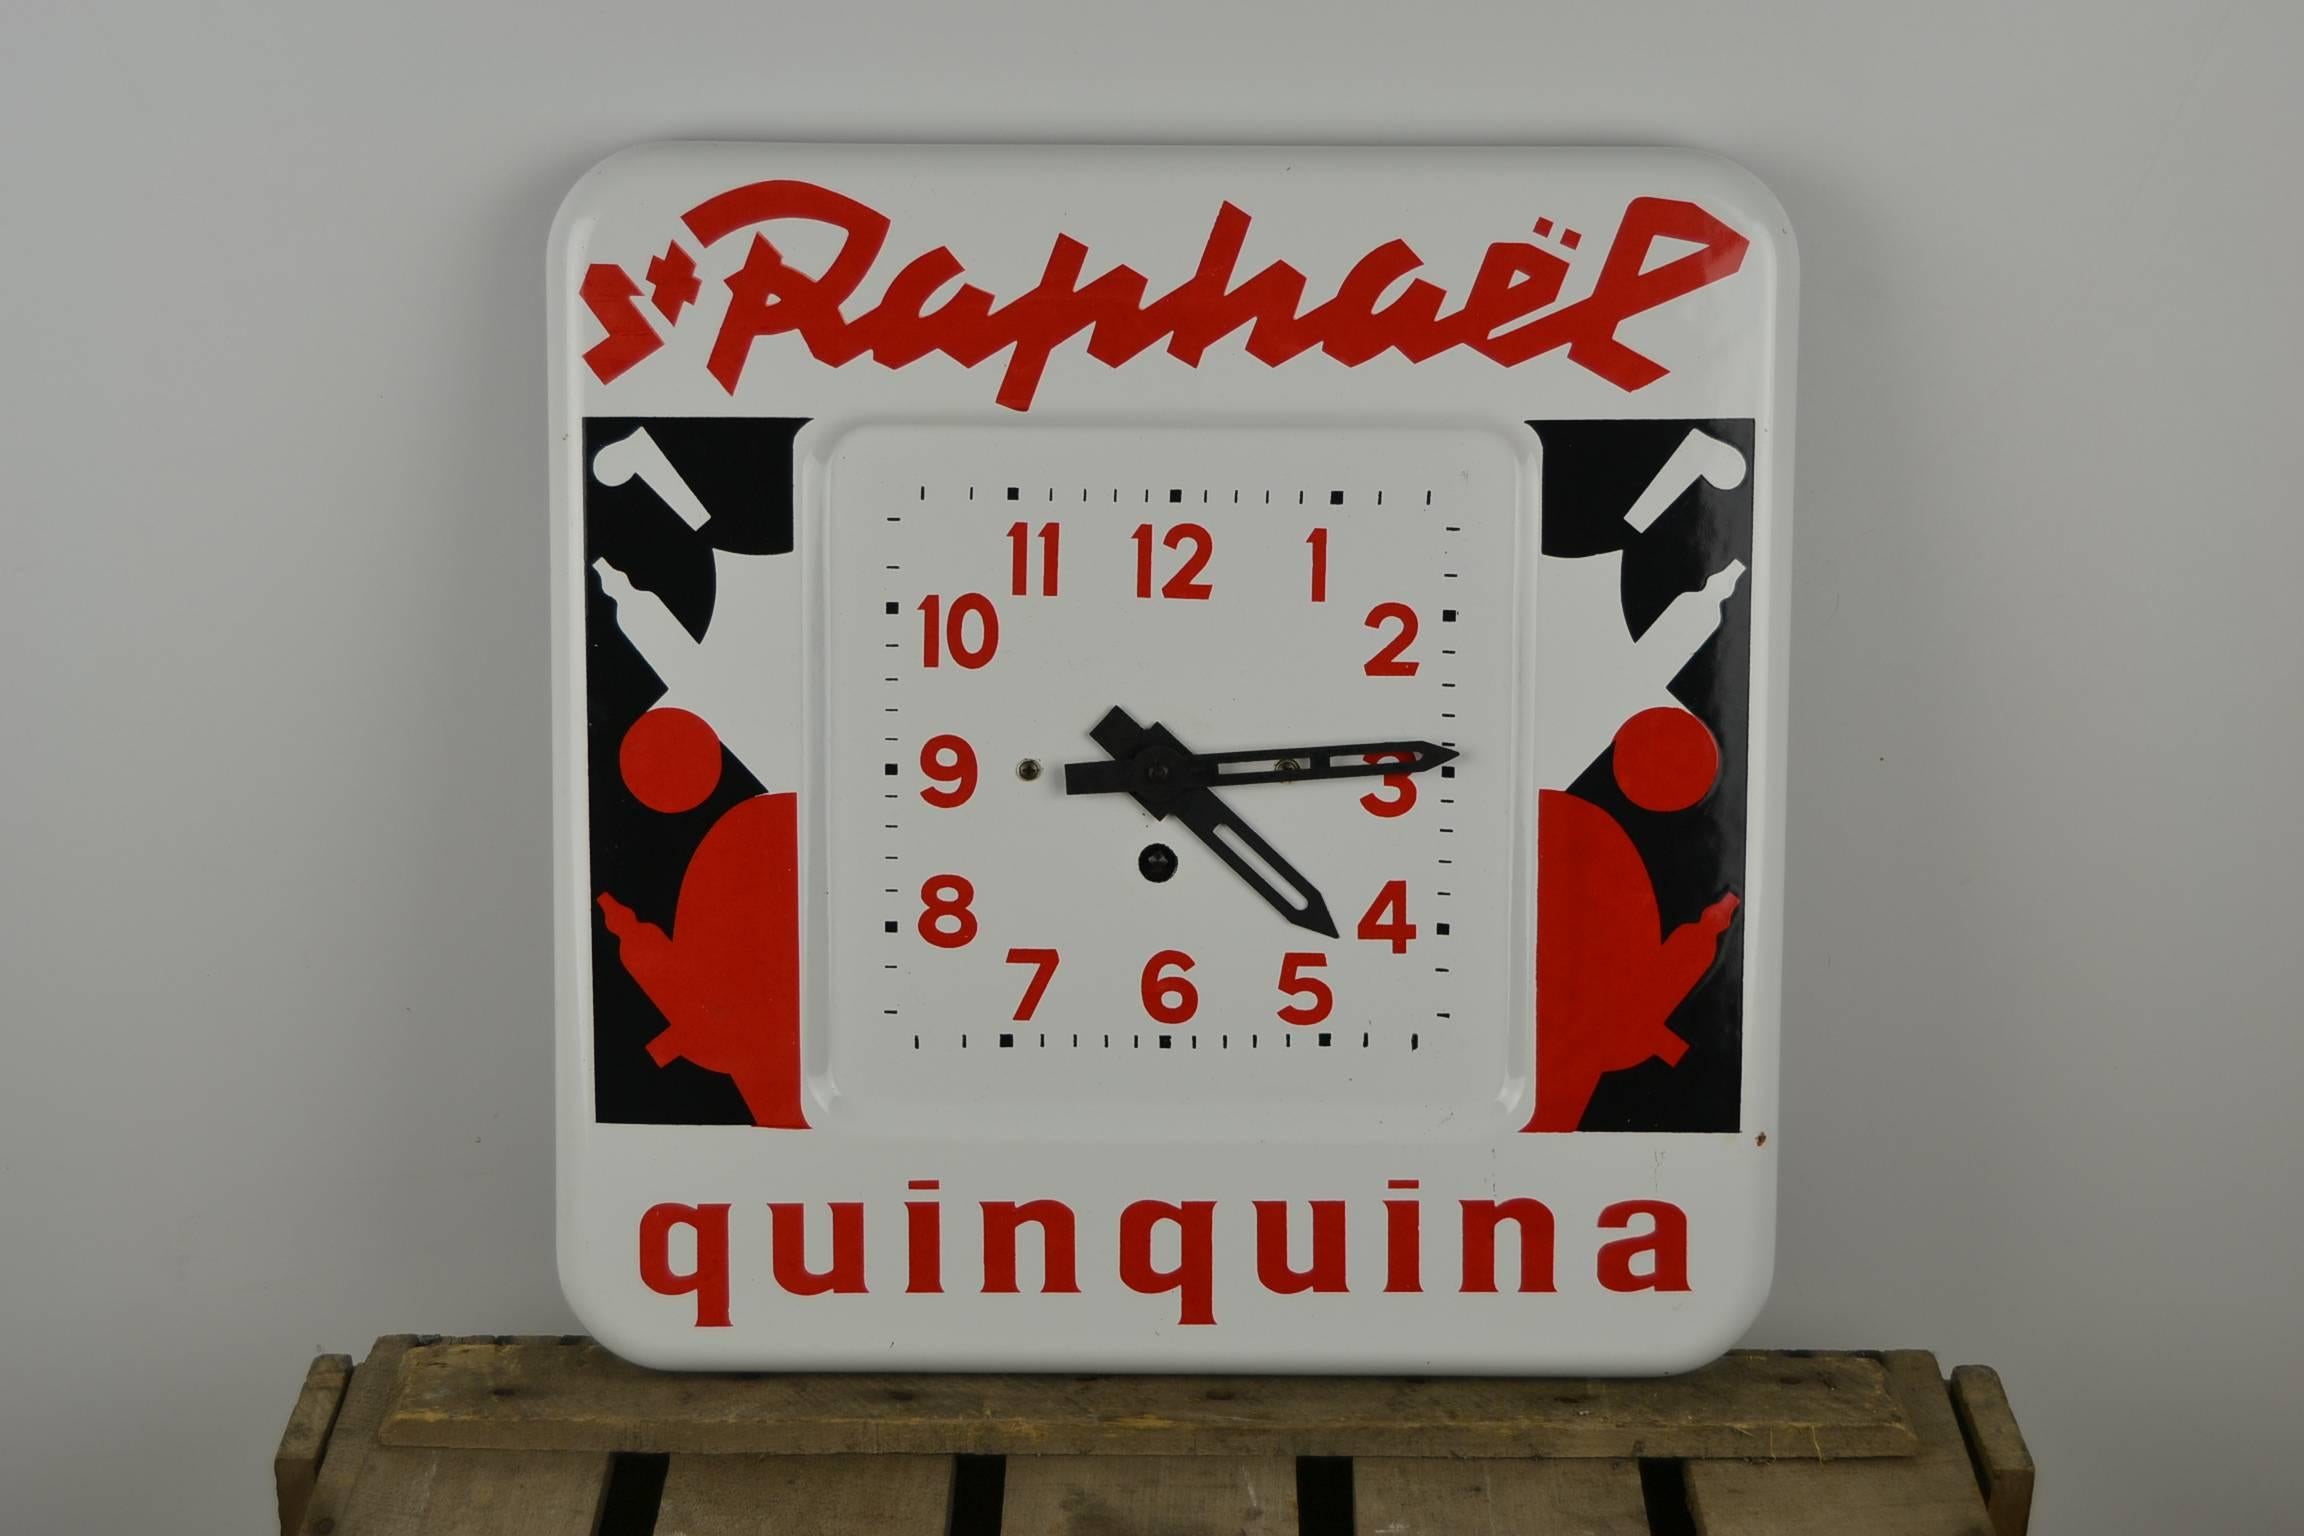 St Raphaël quinquina, French aperitif drink.
Beautiful advertising clock - publicity wall clock from the 1950s.
Enameled metal - porcelain enamel. 
Square shape - nice design with colors white, black and red.
Working condition - wind up system